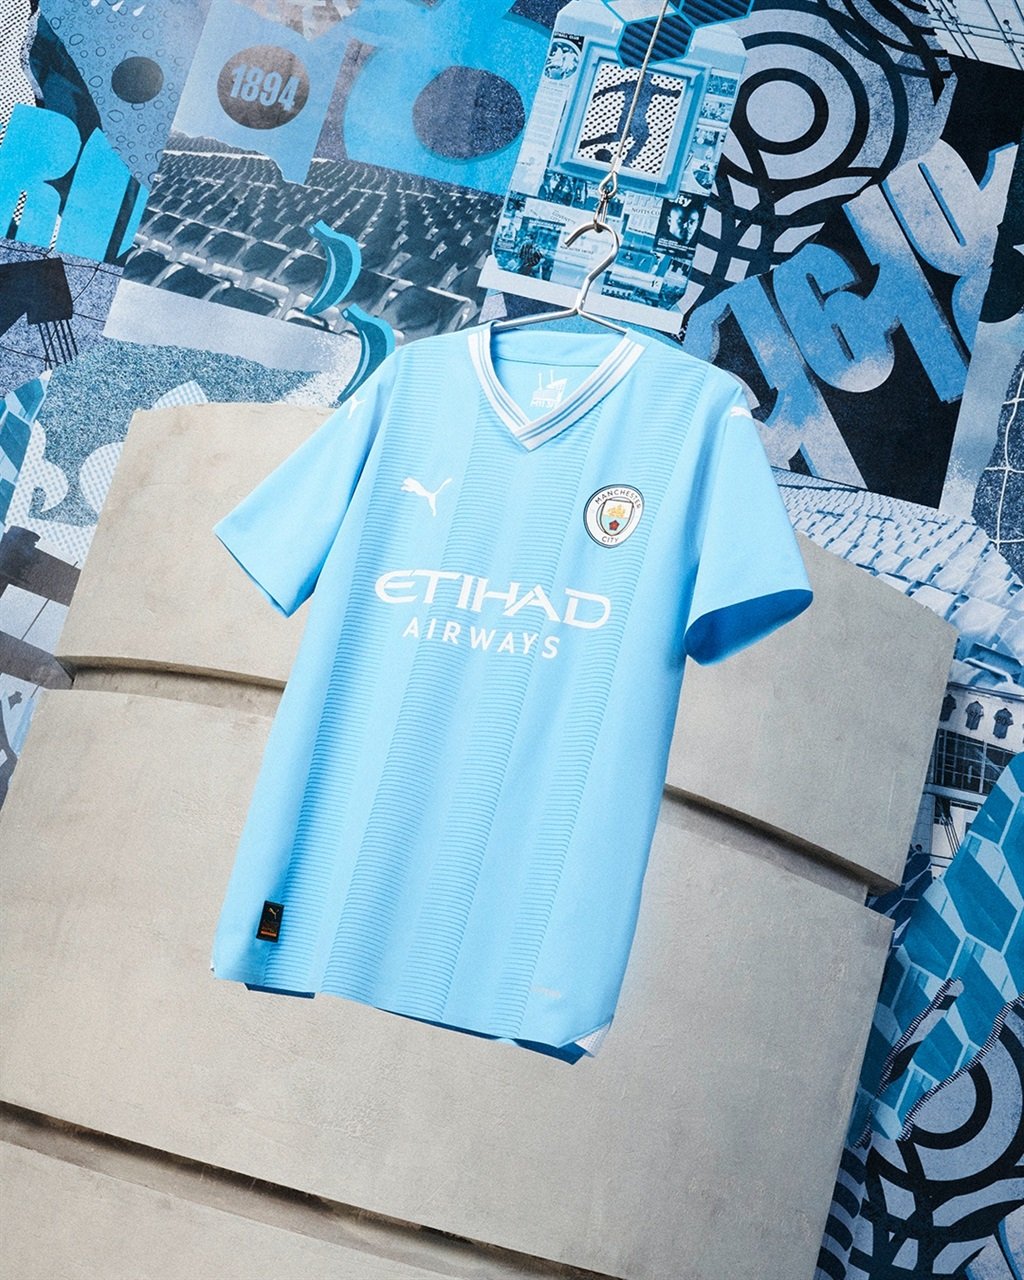 PUMA has launched Manchester City's Home kit for the 2023/24 season.